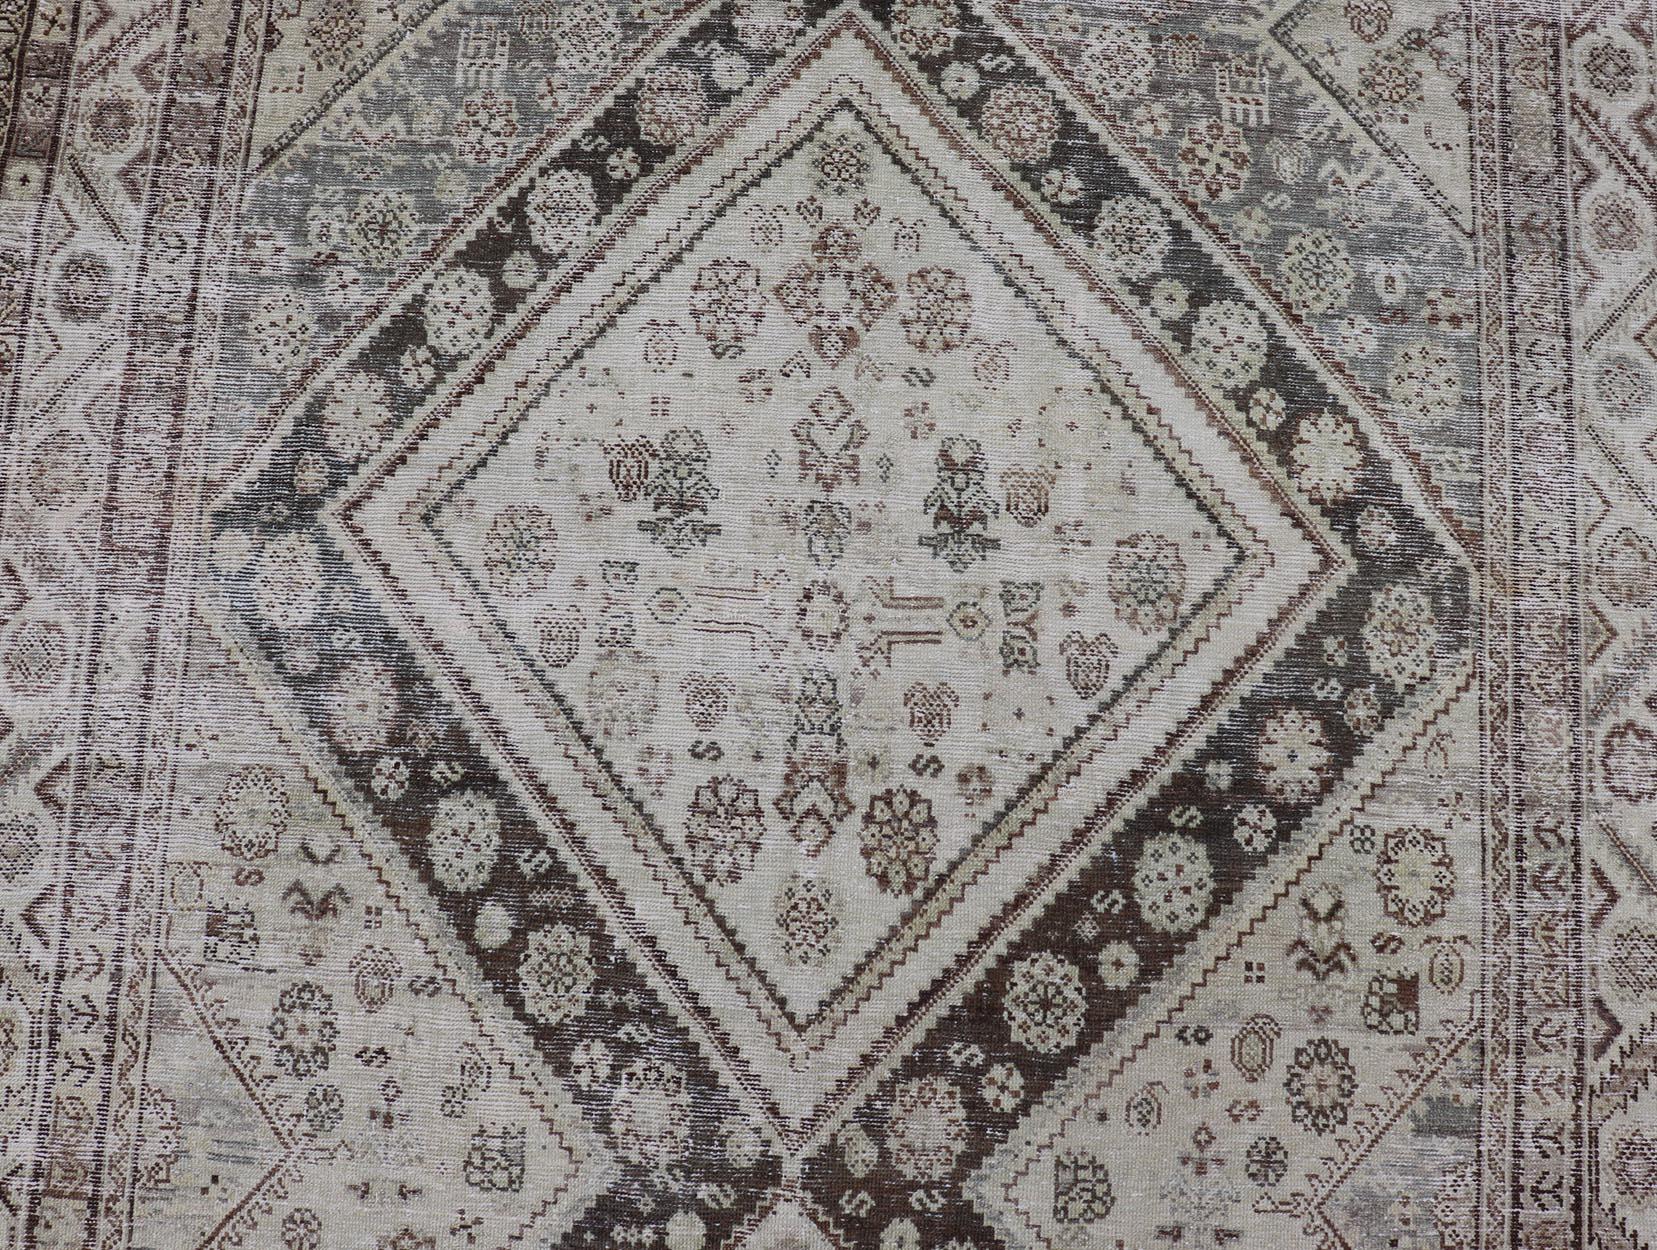 Antique Persian Mahal Gallery Rug with Medallion Design in Cream and Browns For Sale 7